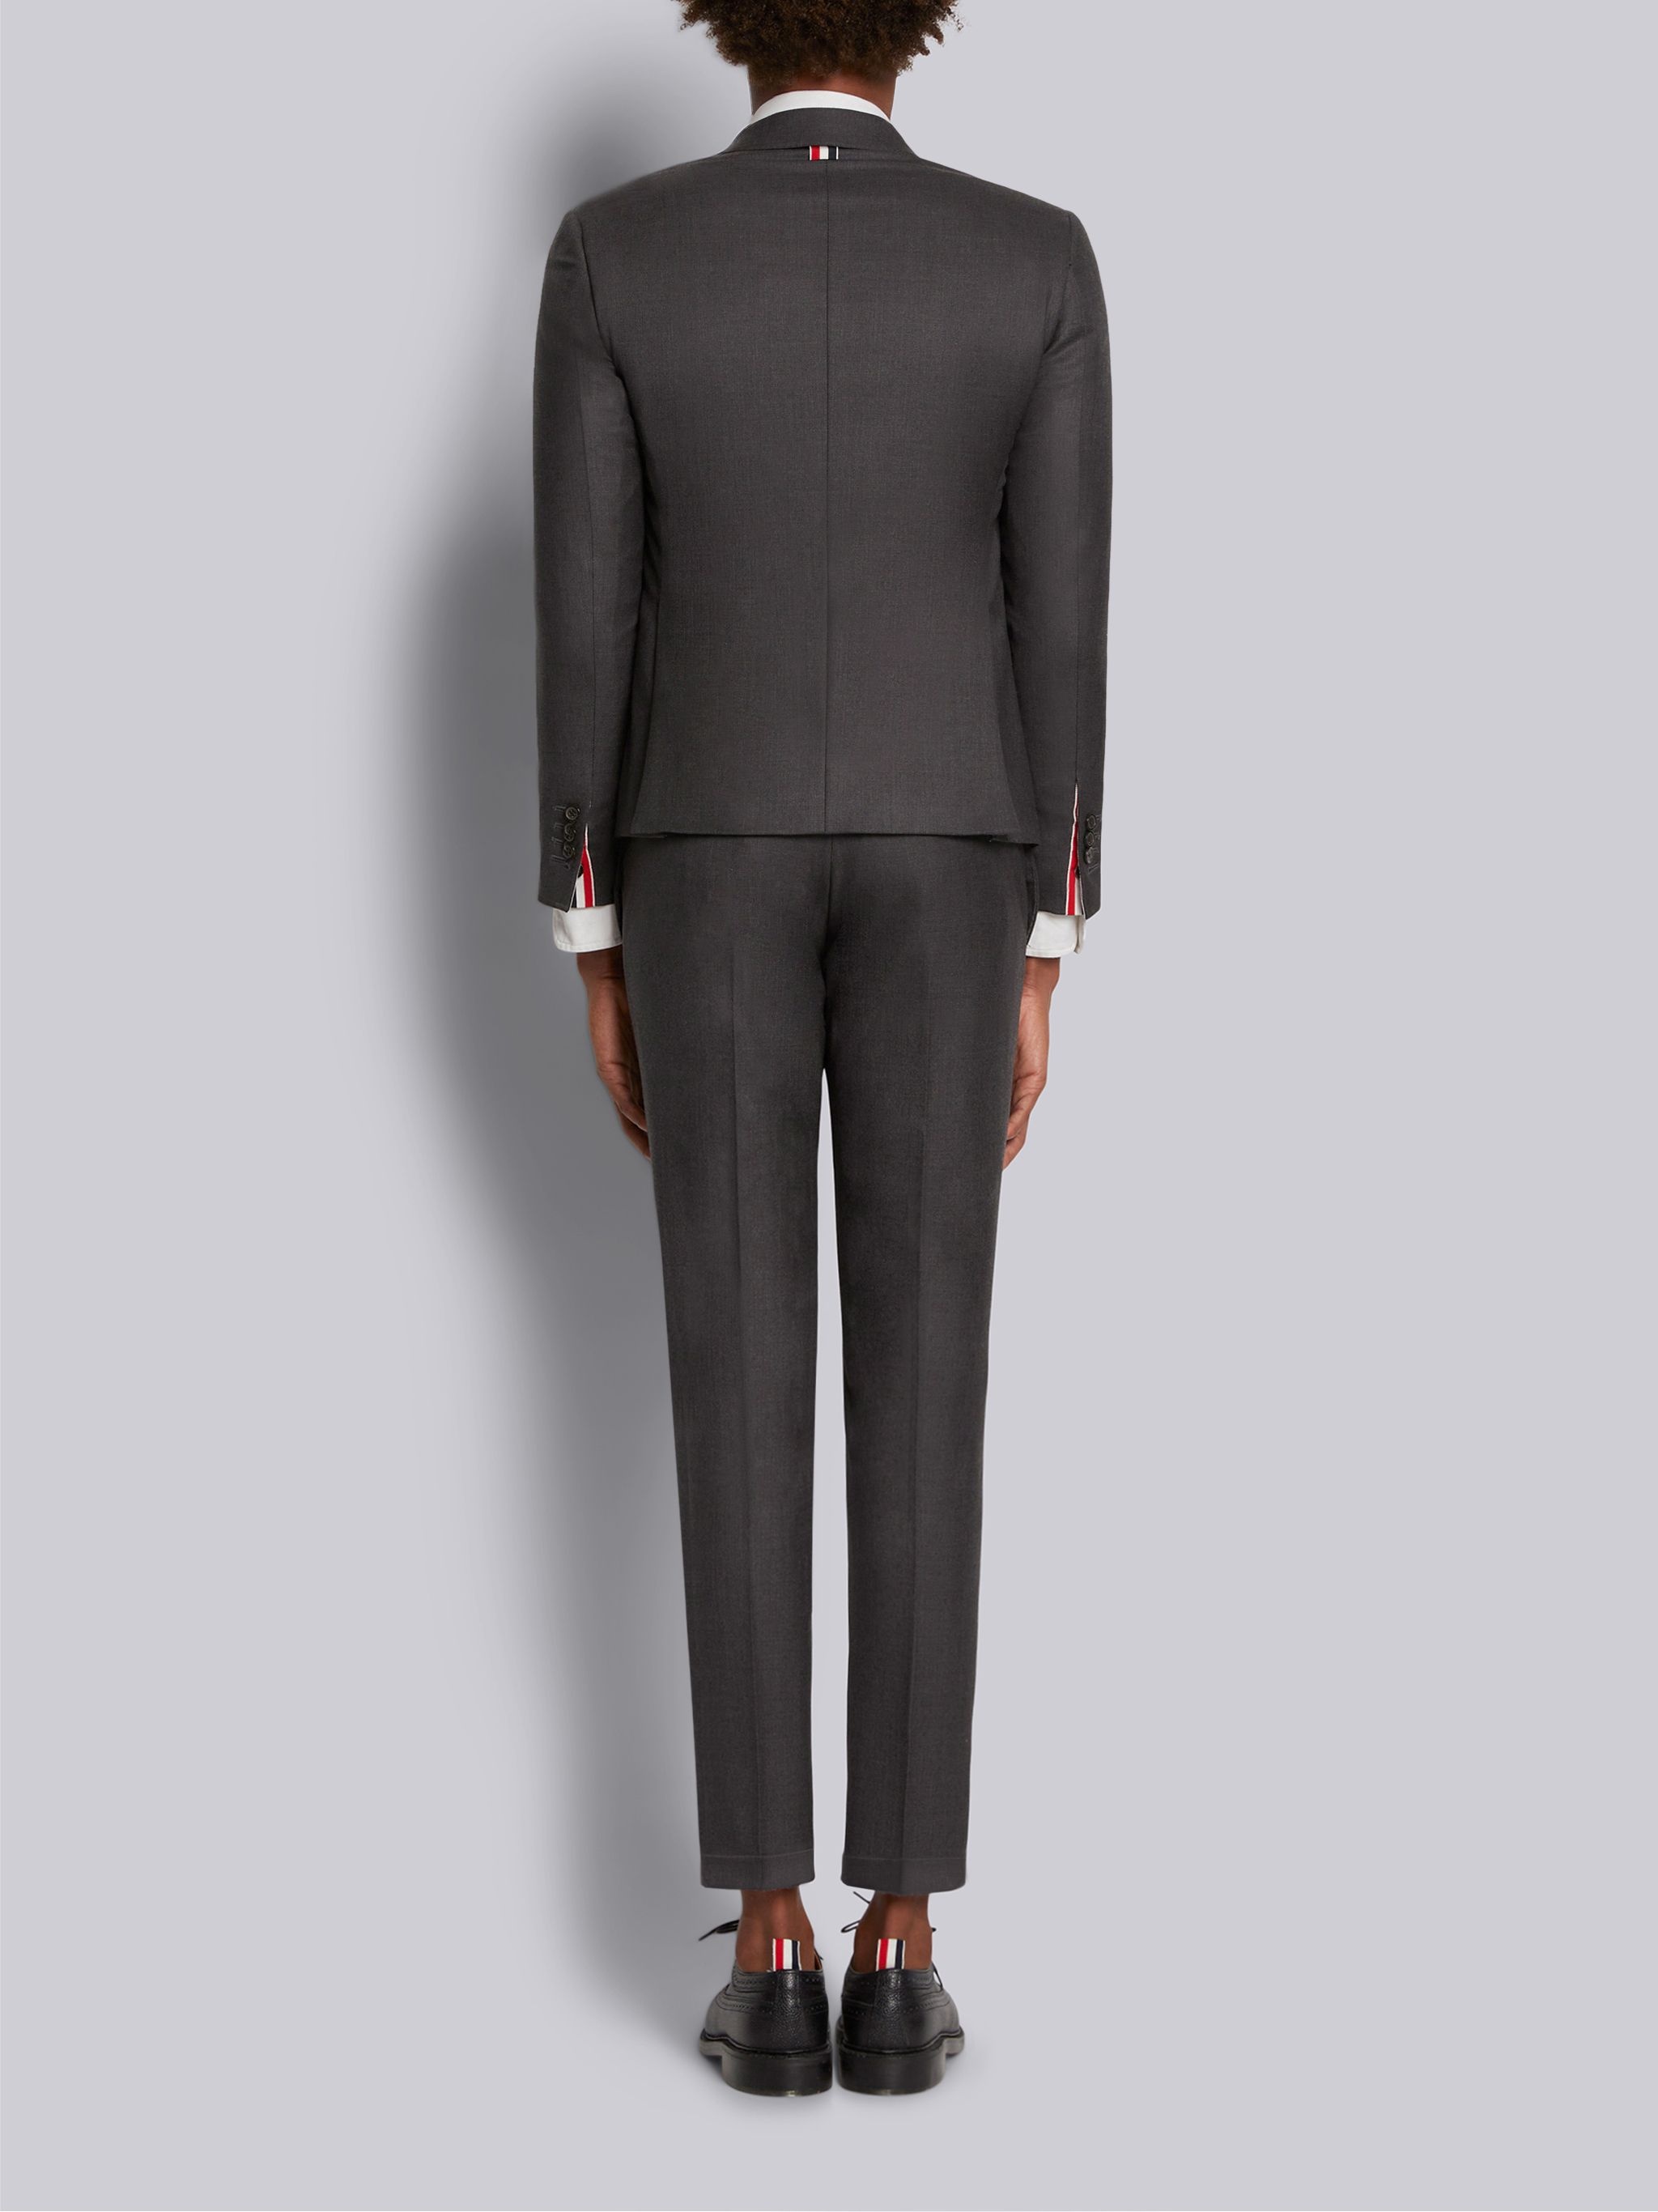 Dark Grey Super 120s Twill High Armhole Suit With Tie And Low Rise Skinny Trouser - 3